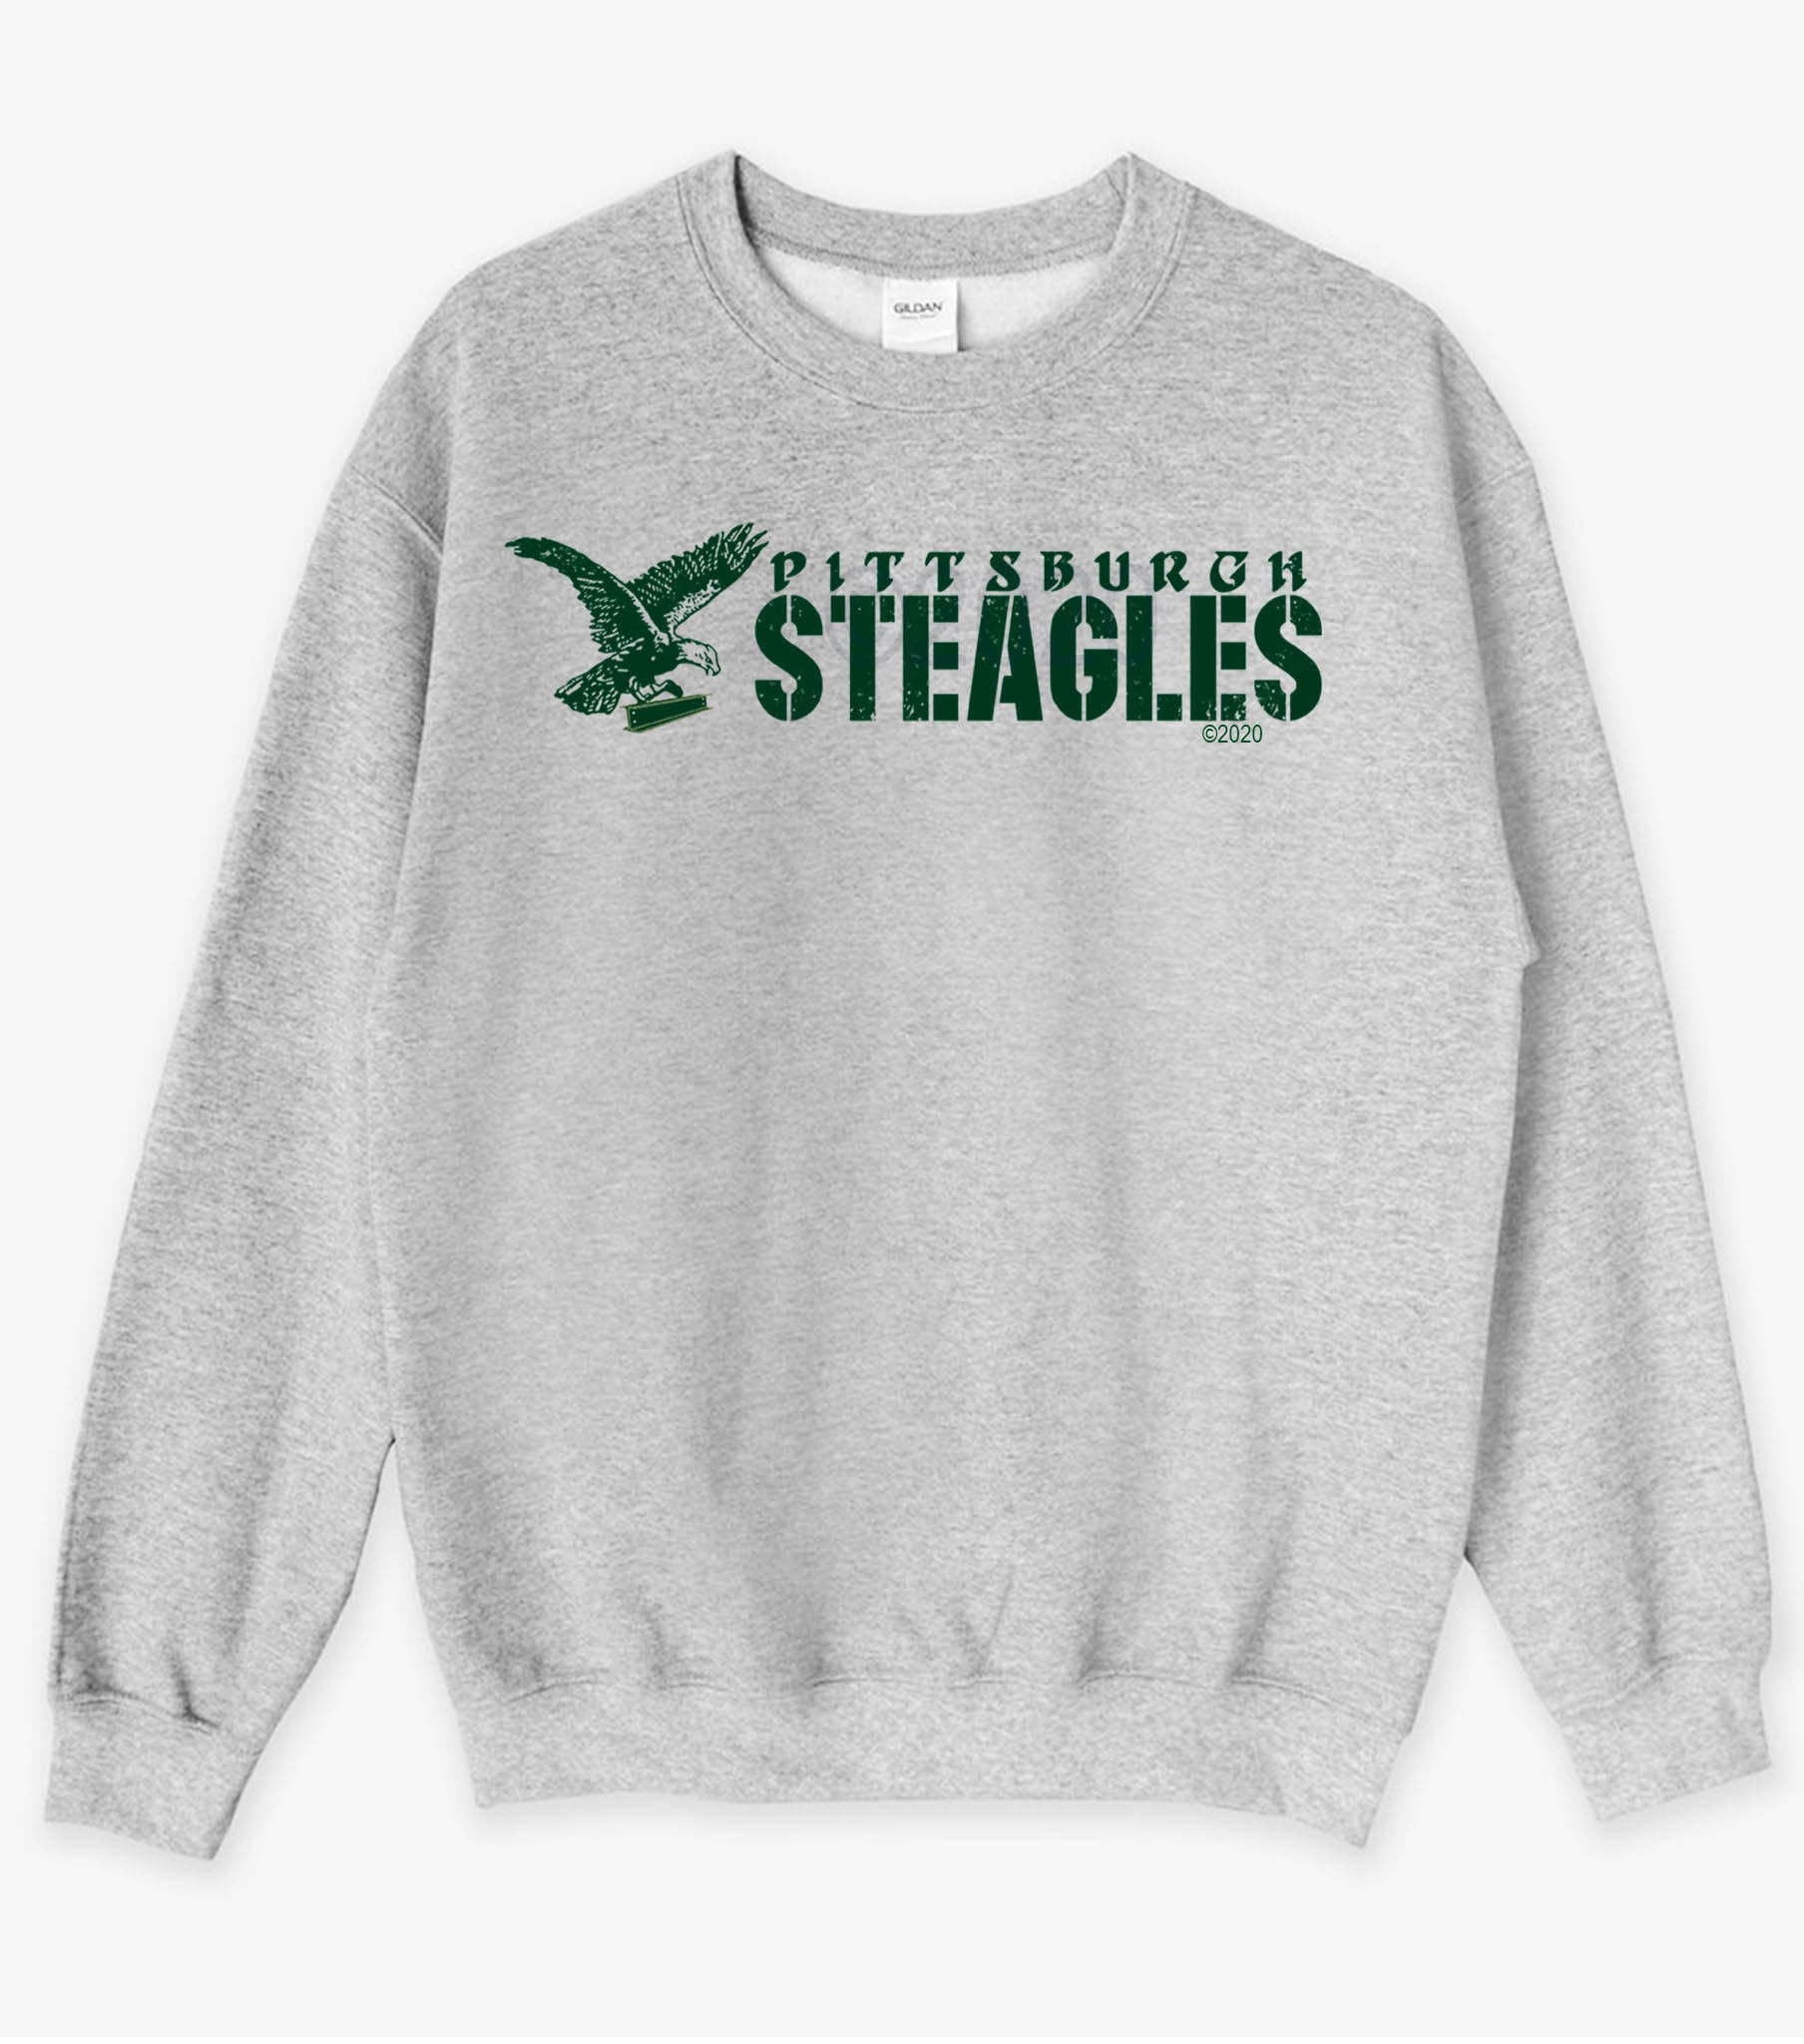  Steagles 1943 Phil-Pitt Steagles Football Fans Steagles T-Shirt  : Clothing, Shoes & Jewelry